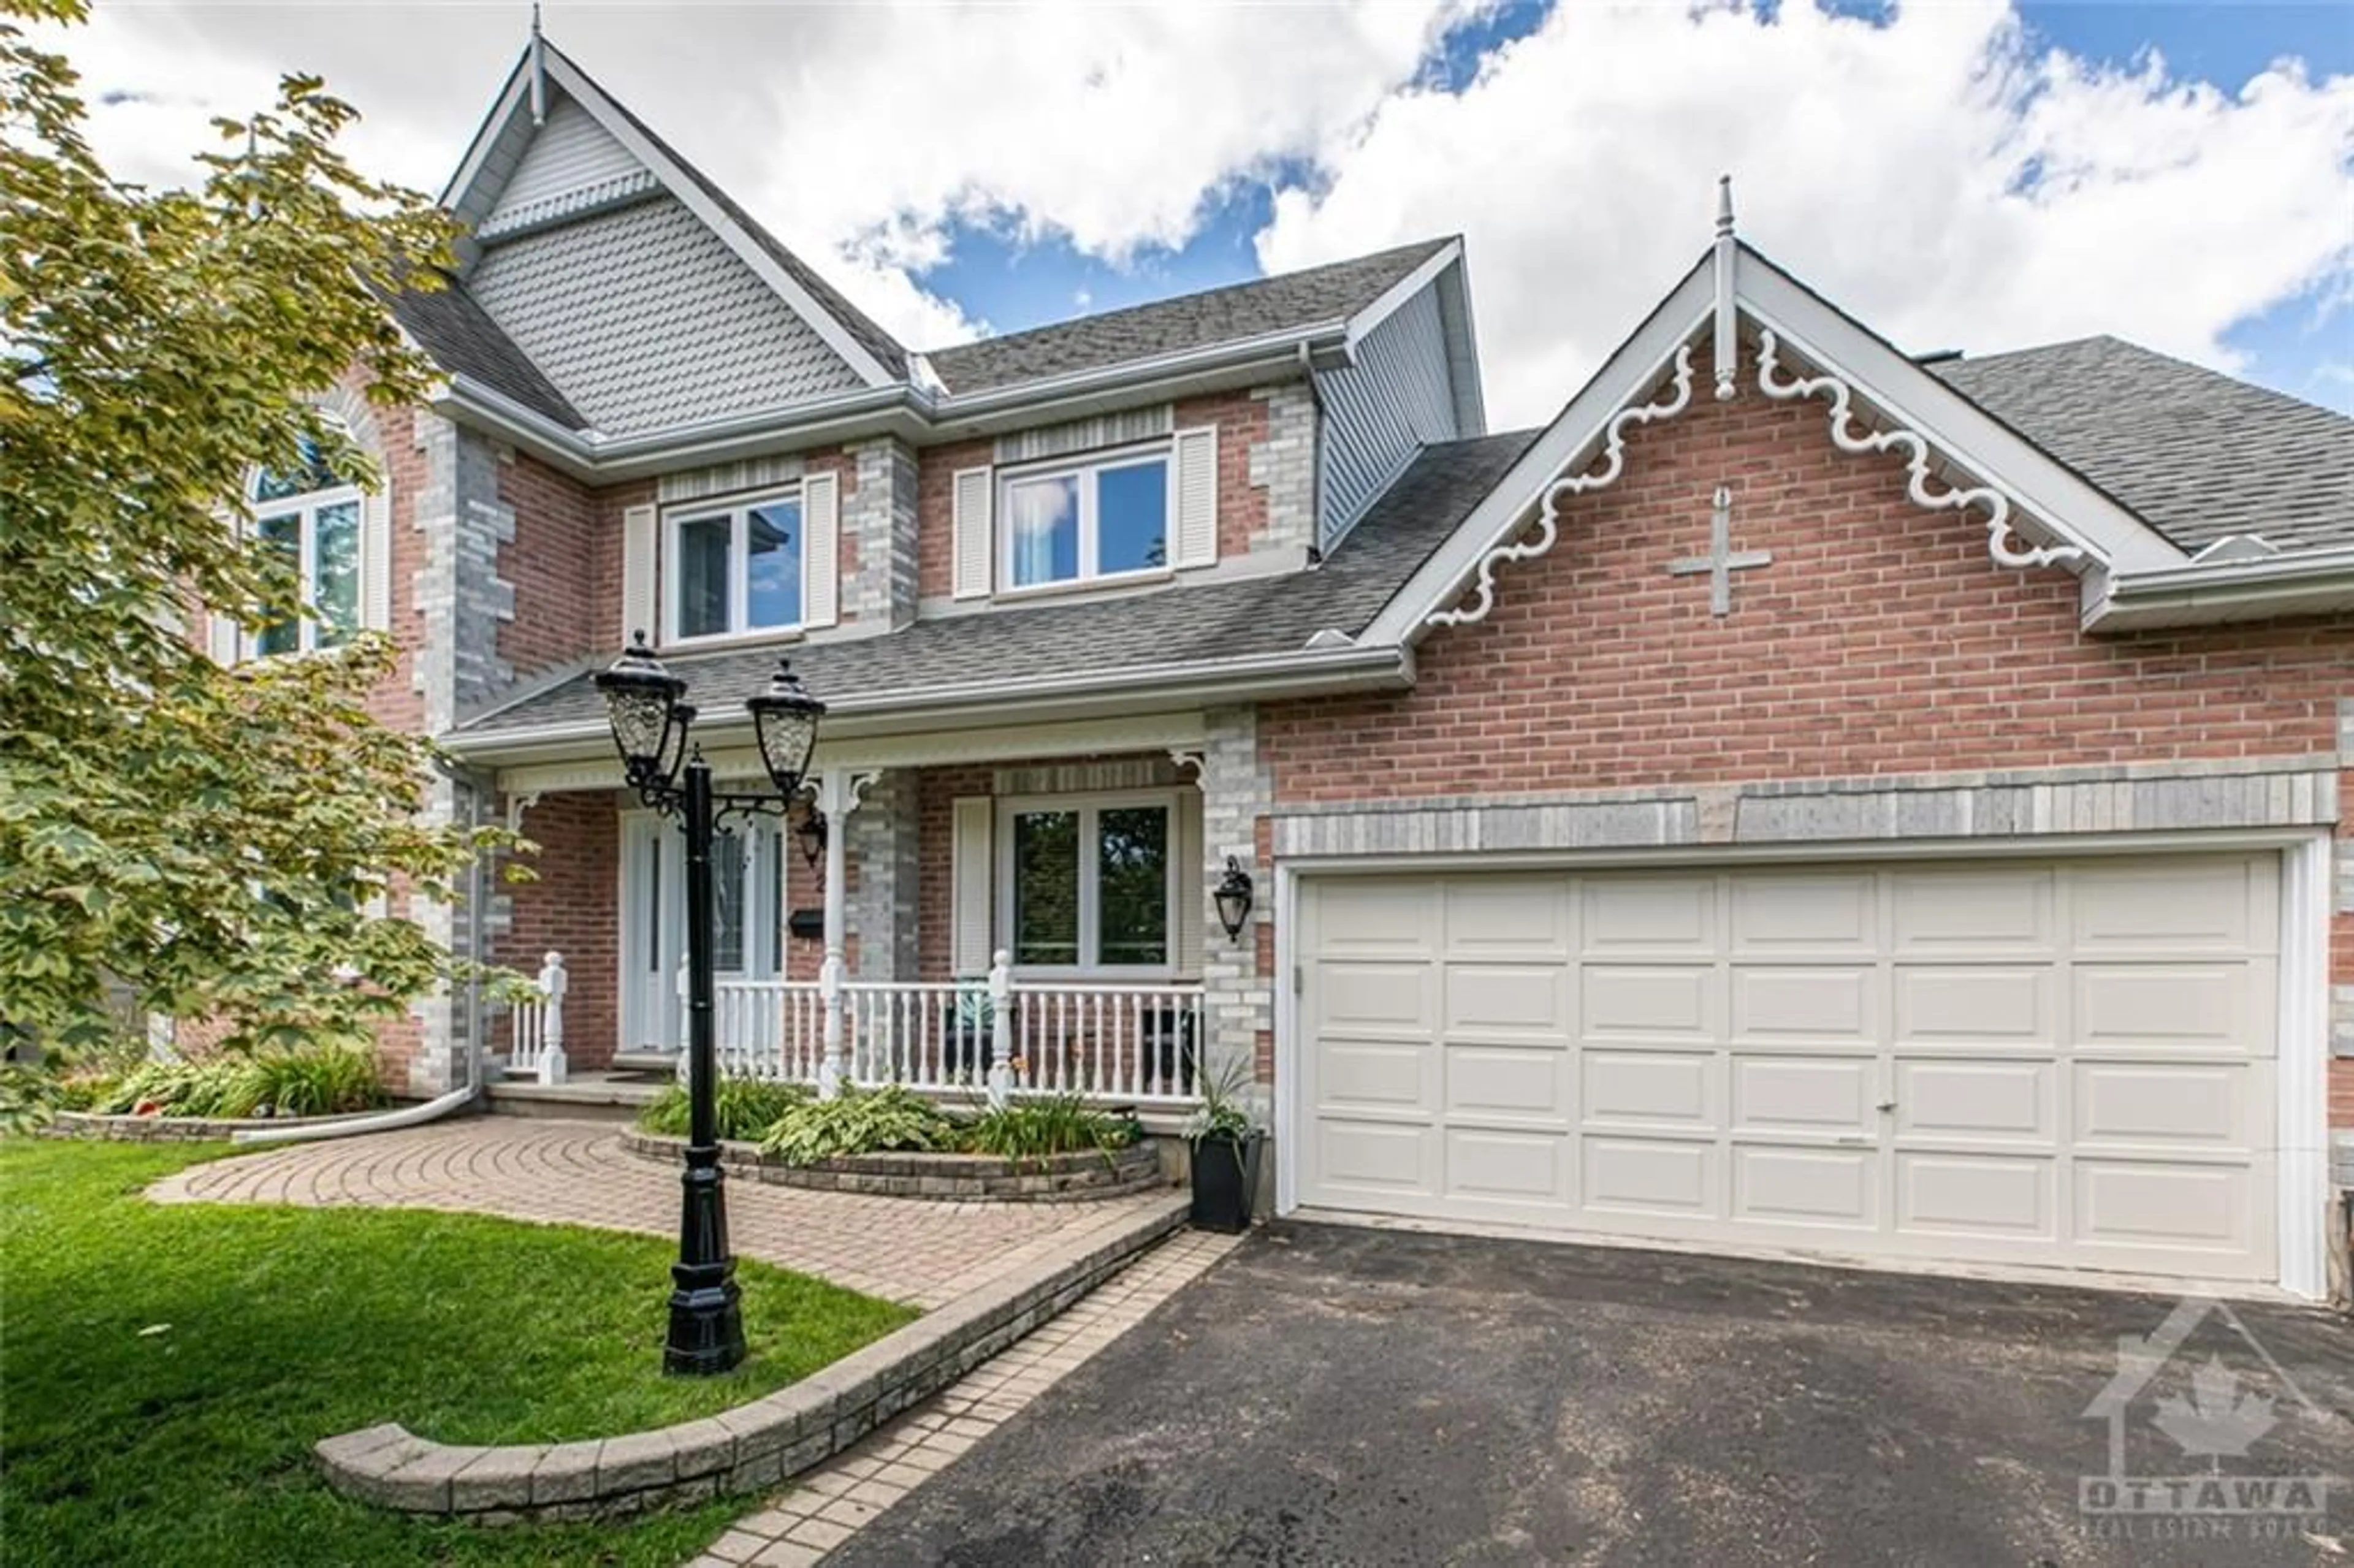 Home with brick exterior material for 24 DELAMERE Dr, Stittsville Ontario K2S 1G7